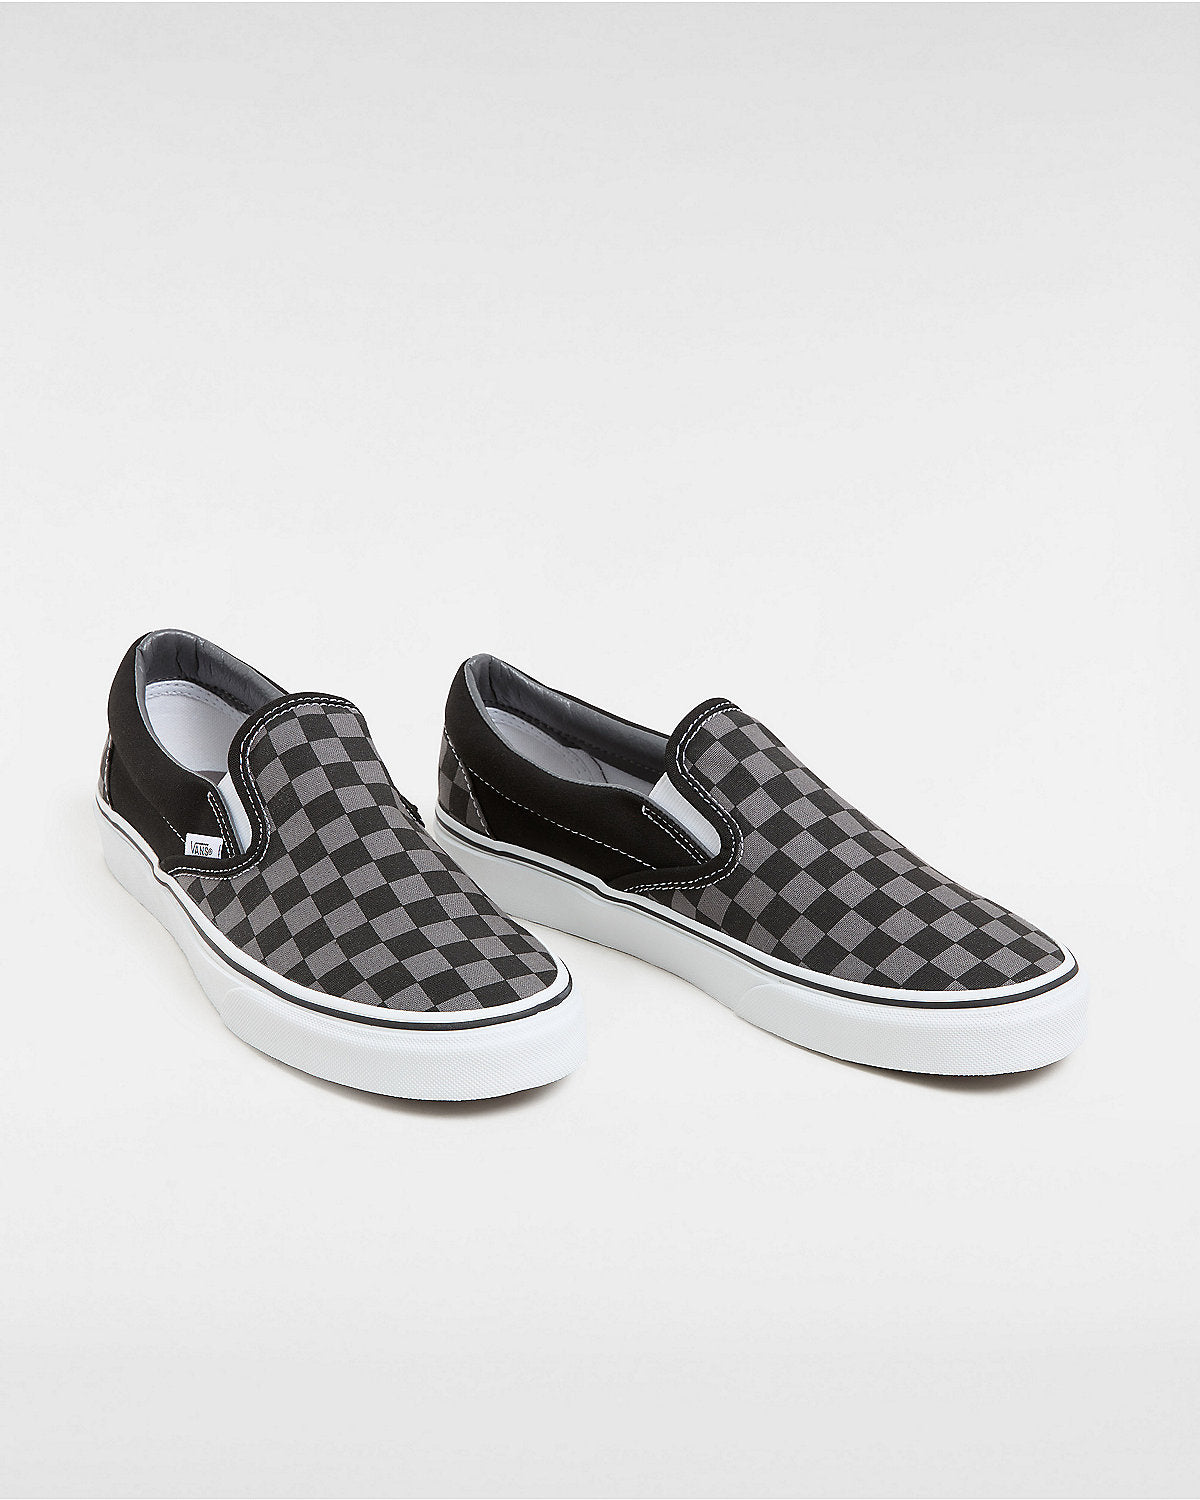 VANS Unisex Classic Slip-On Checkerboard Trainers - Black / Pewter